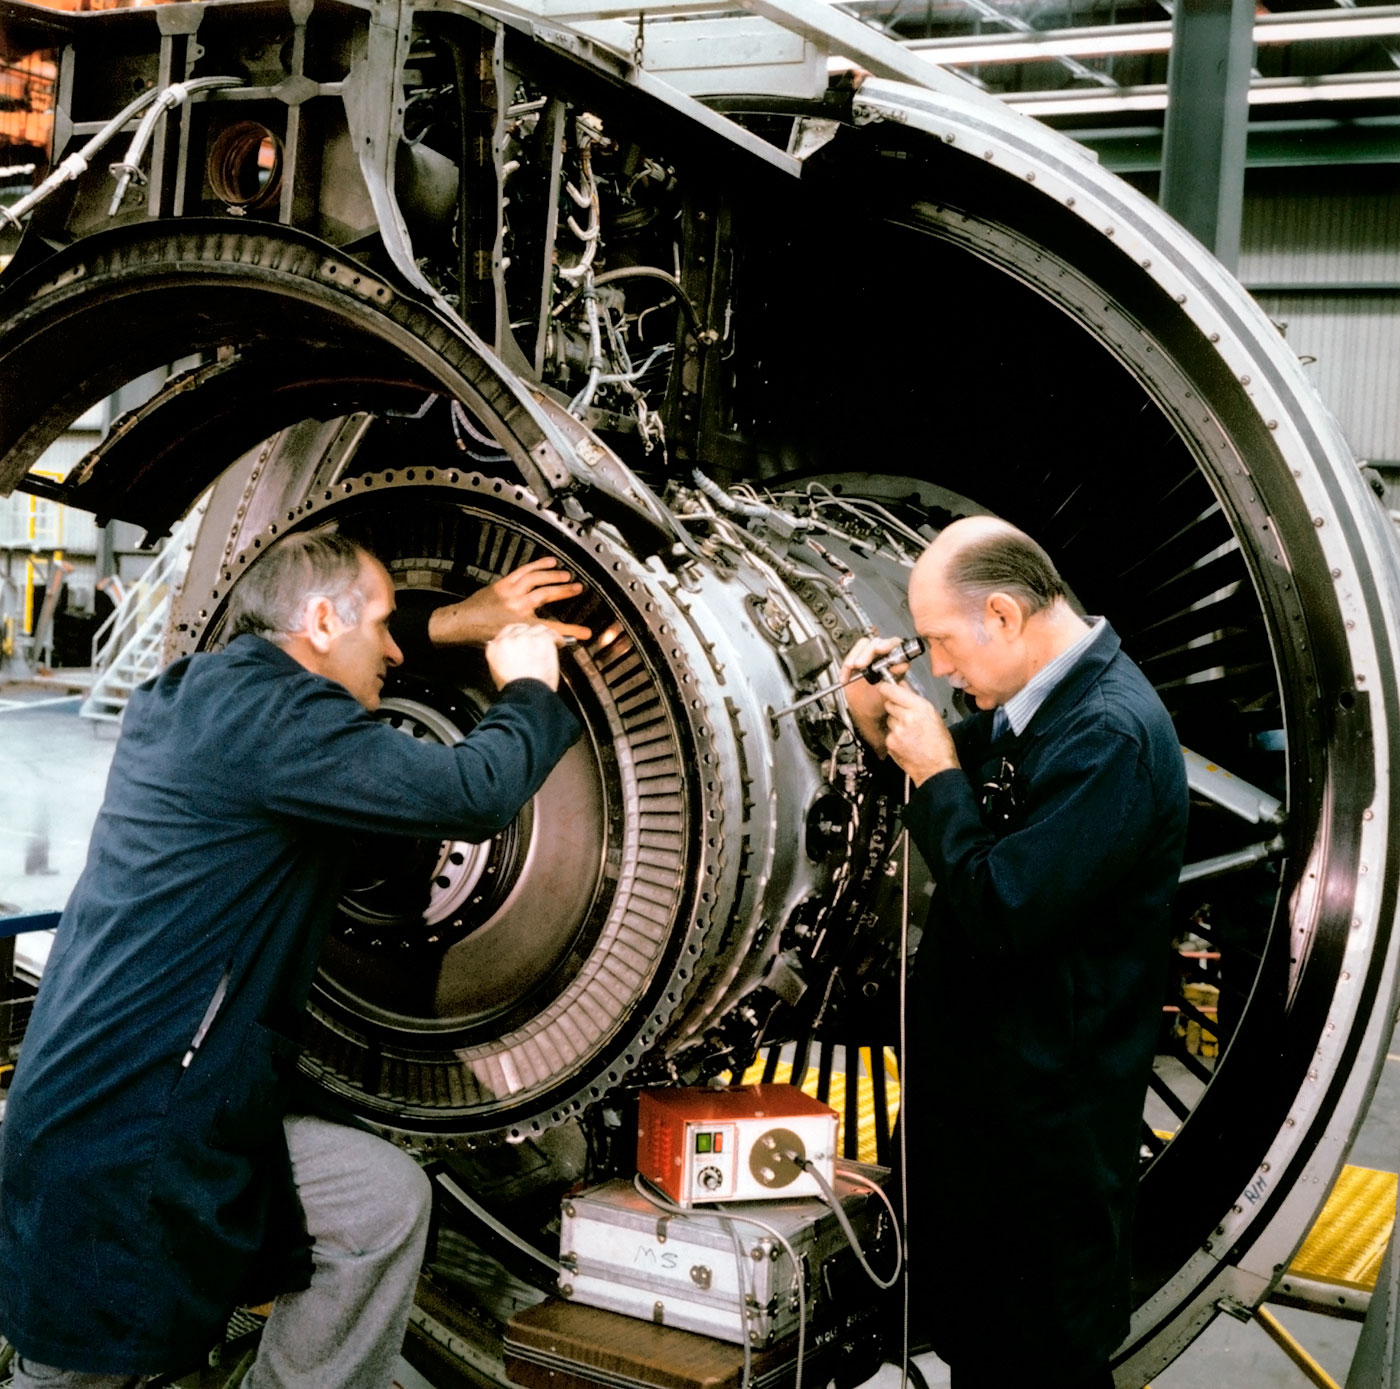 Two older male engineers working on an engine.